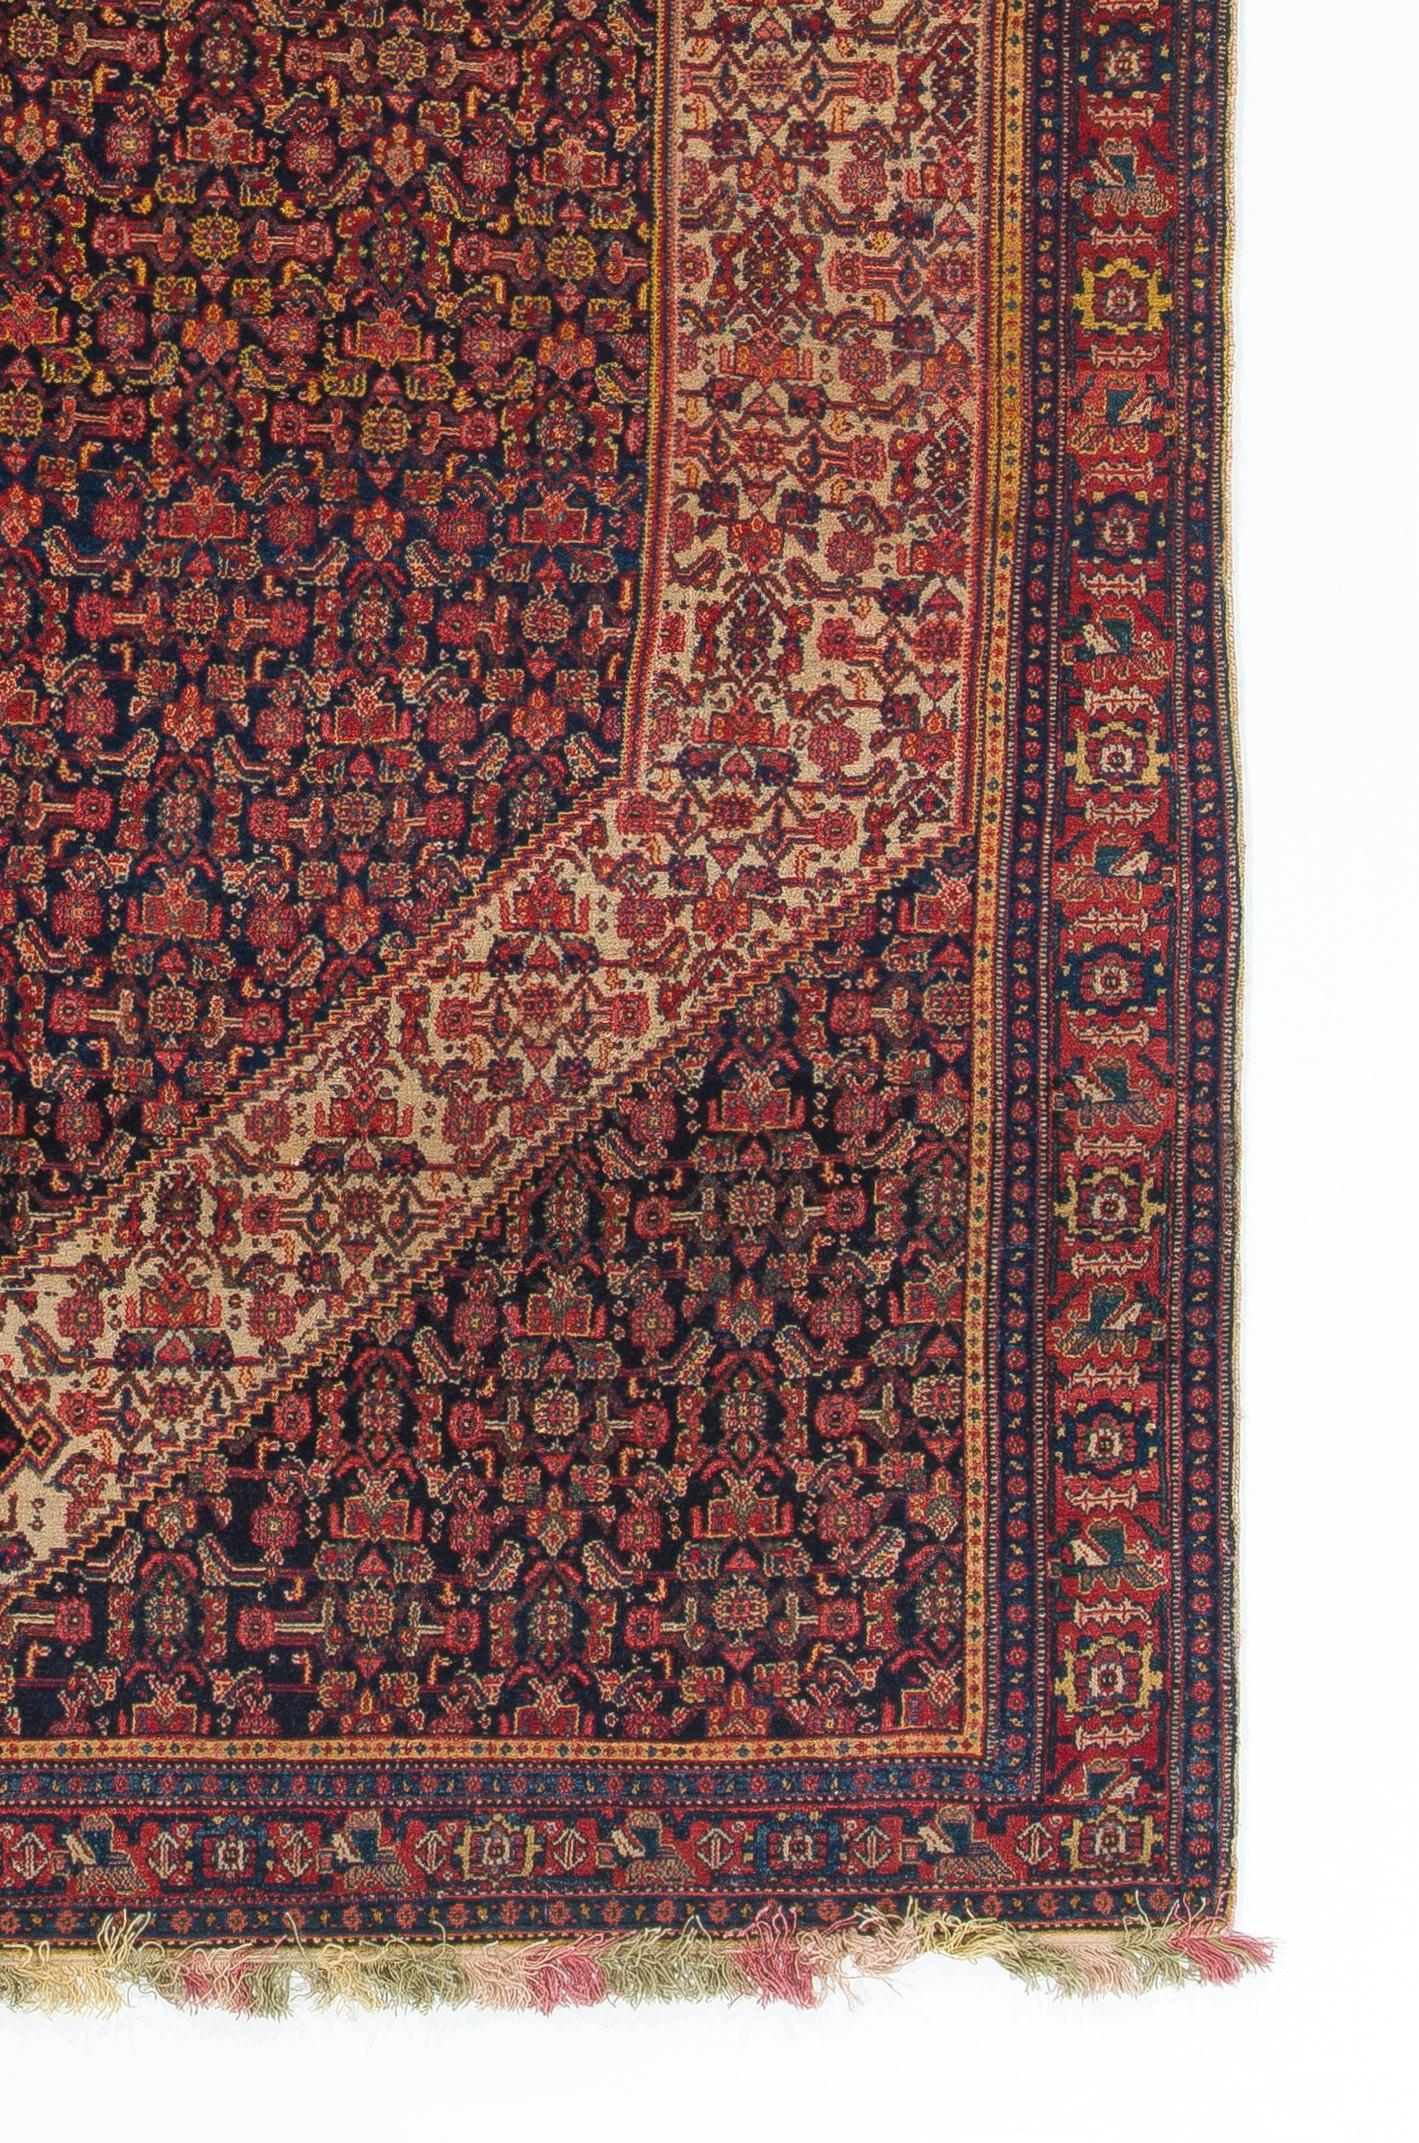 19th Century 4.3x6.8 ft Fine Antique Persian Senneh Wool Rug with Colorful Silk Warps & Wefts For Sale